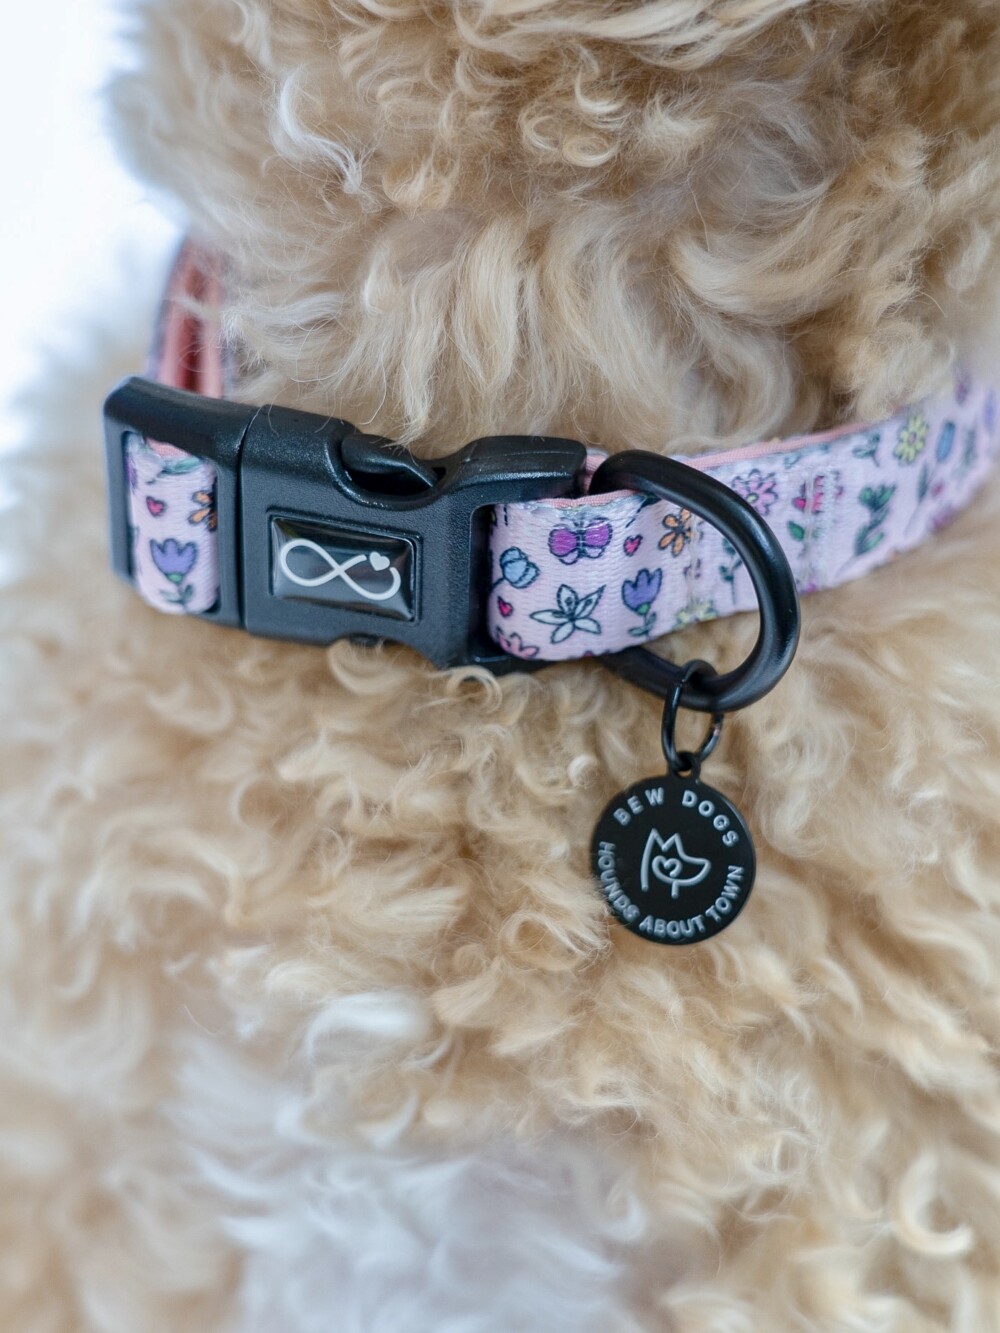 a close up of a fluffy dog wearing a pink collar with flowers on it and a bew dogs logo tag